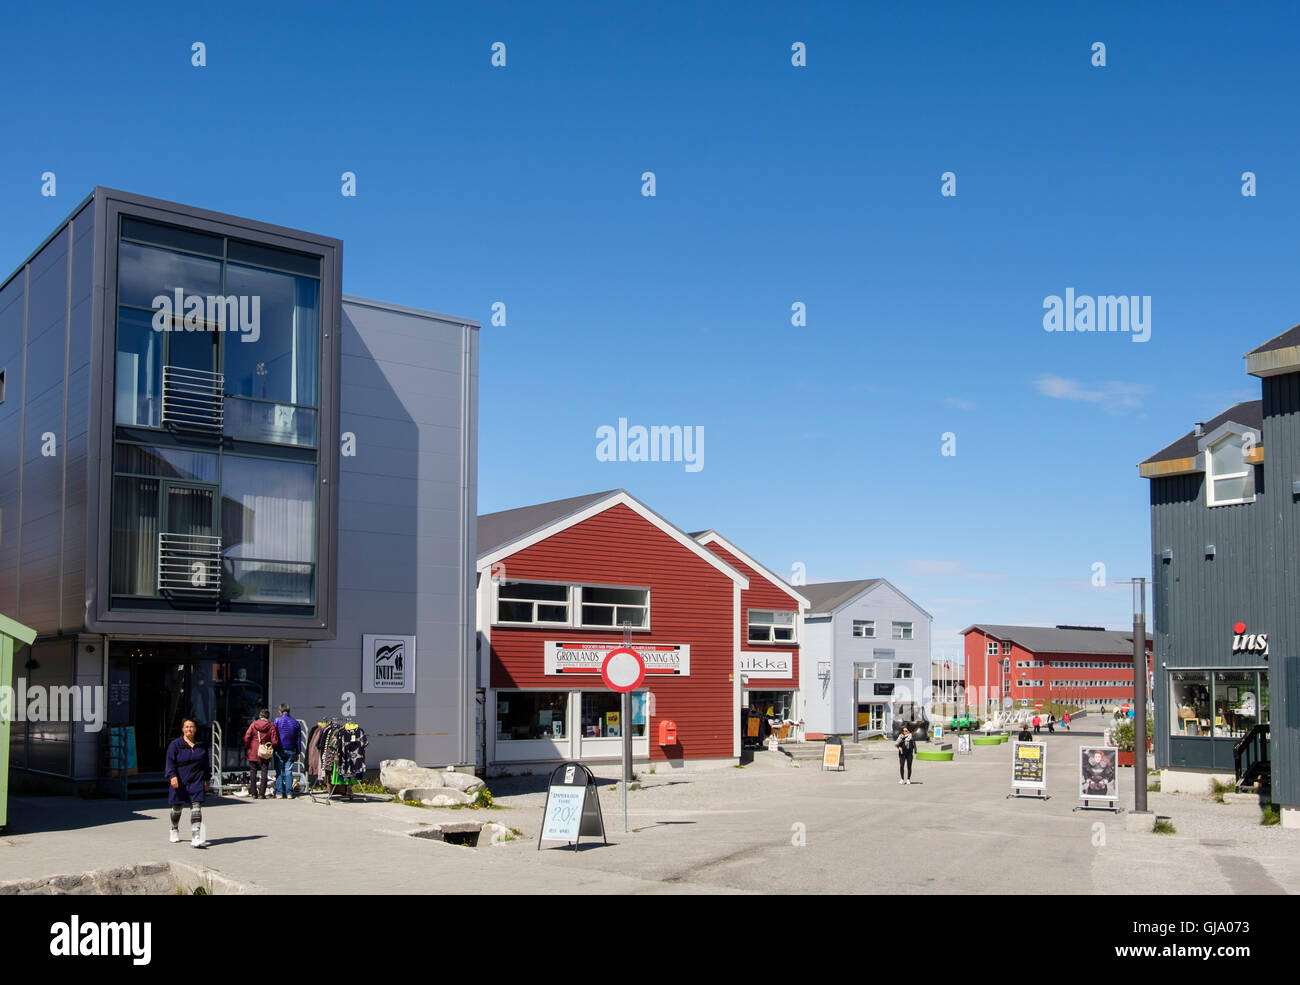 Street scene with modern shops in the retail district on Imaneq, Nuuk, Sermersooq, Greenland Stock Photo